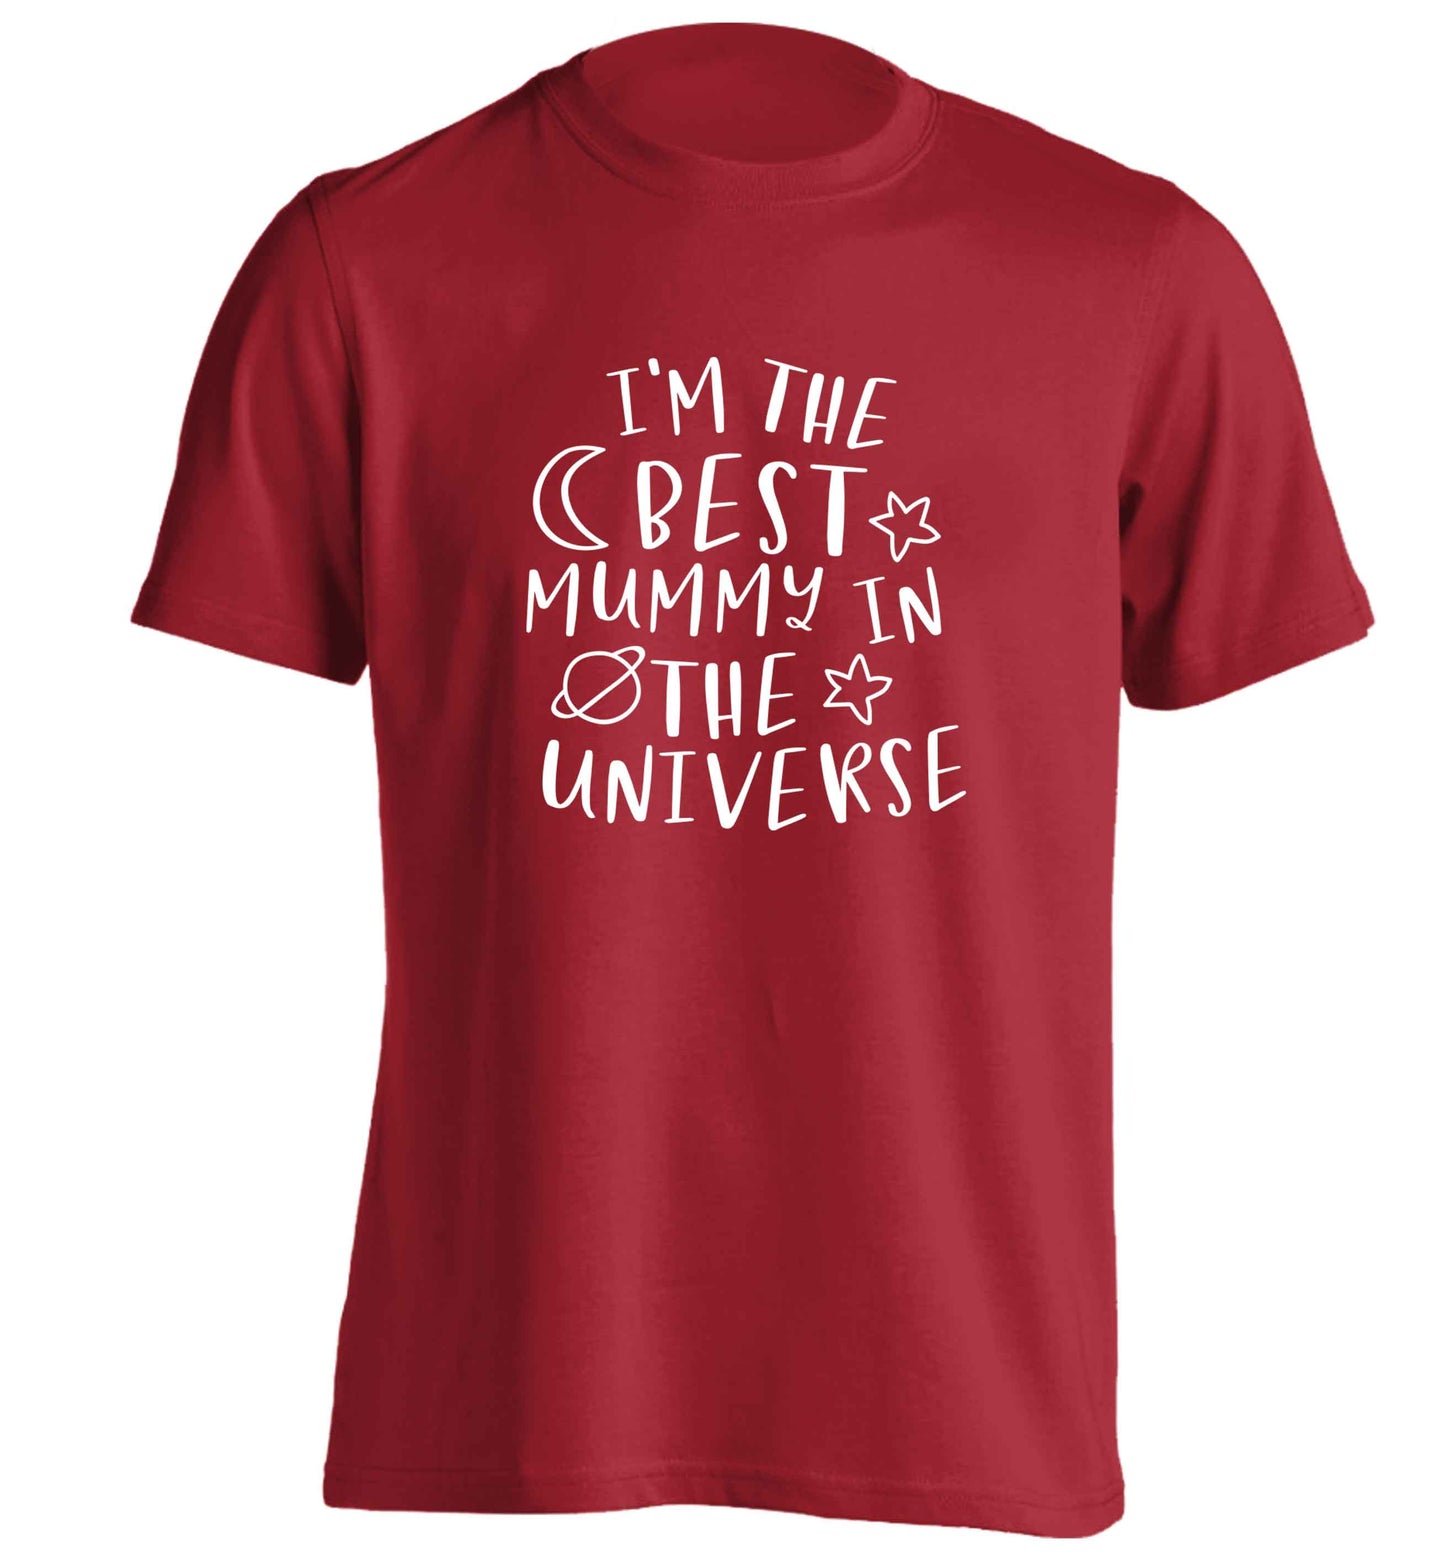 I'm the best mummy in the universe adults unisex red Tshirt 2XL